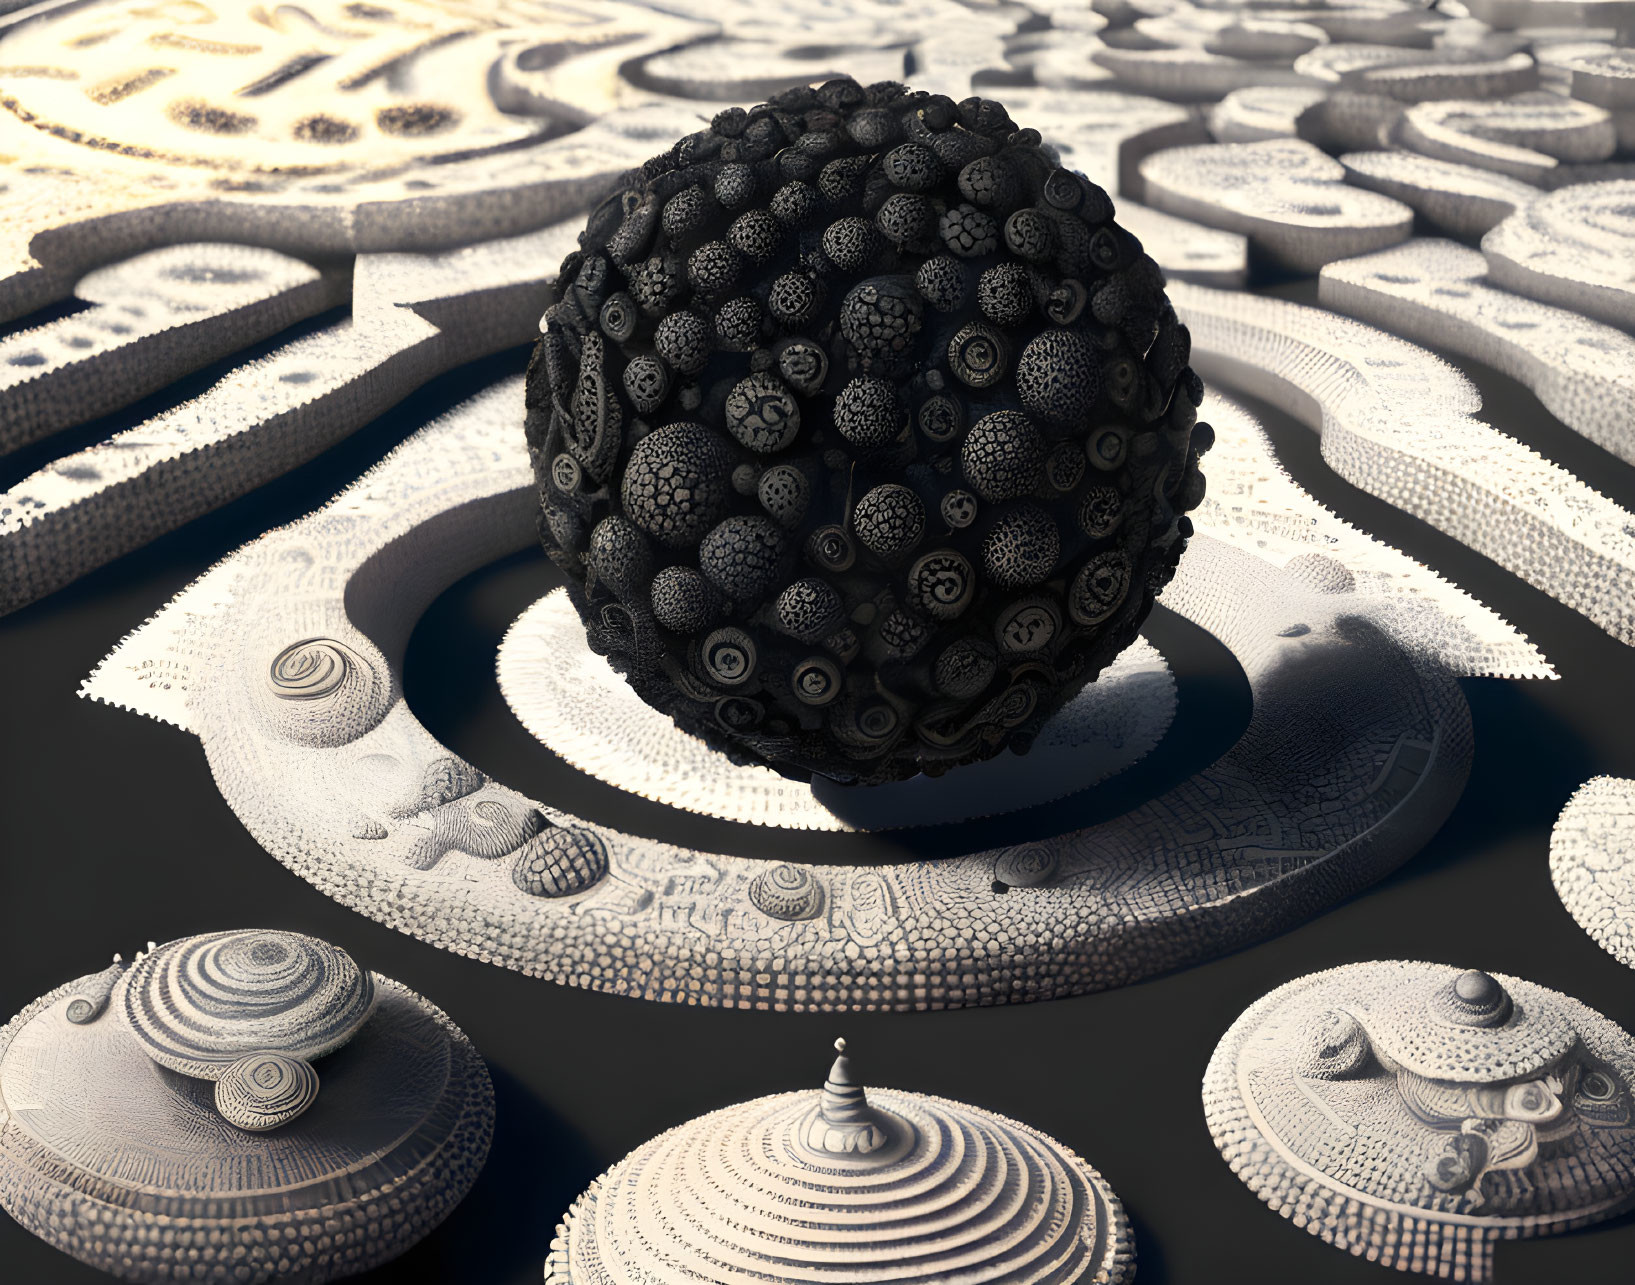 Intricate Textured Sphere on Circular Platform with Artistic Orbs